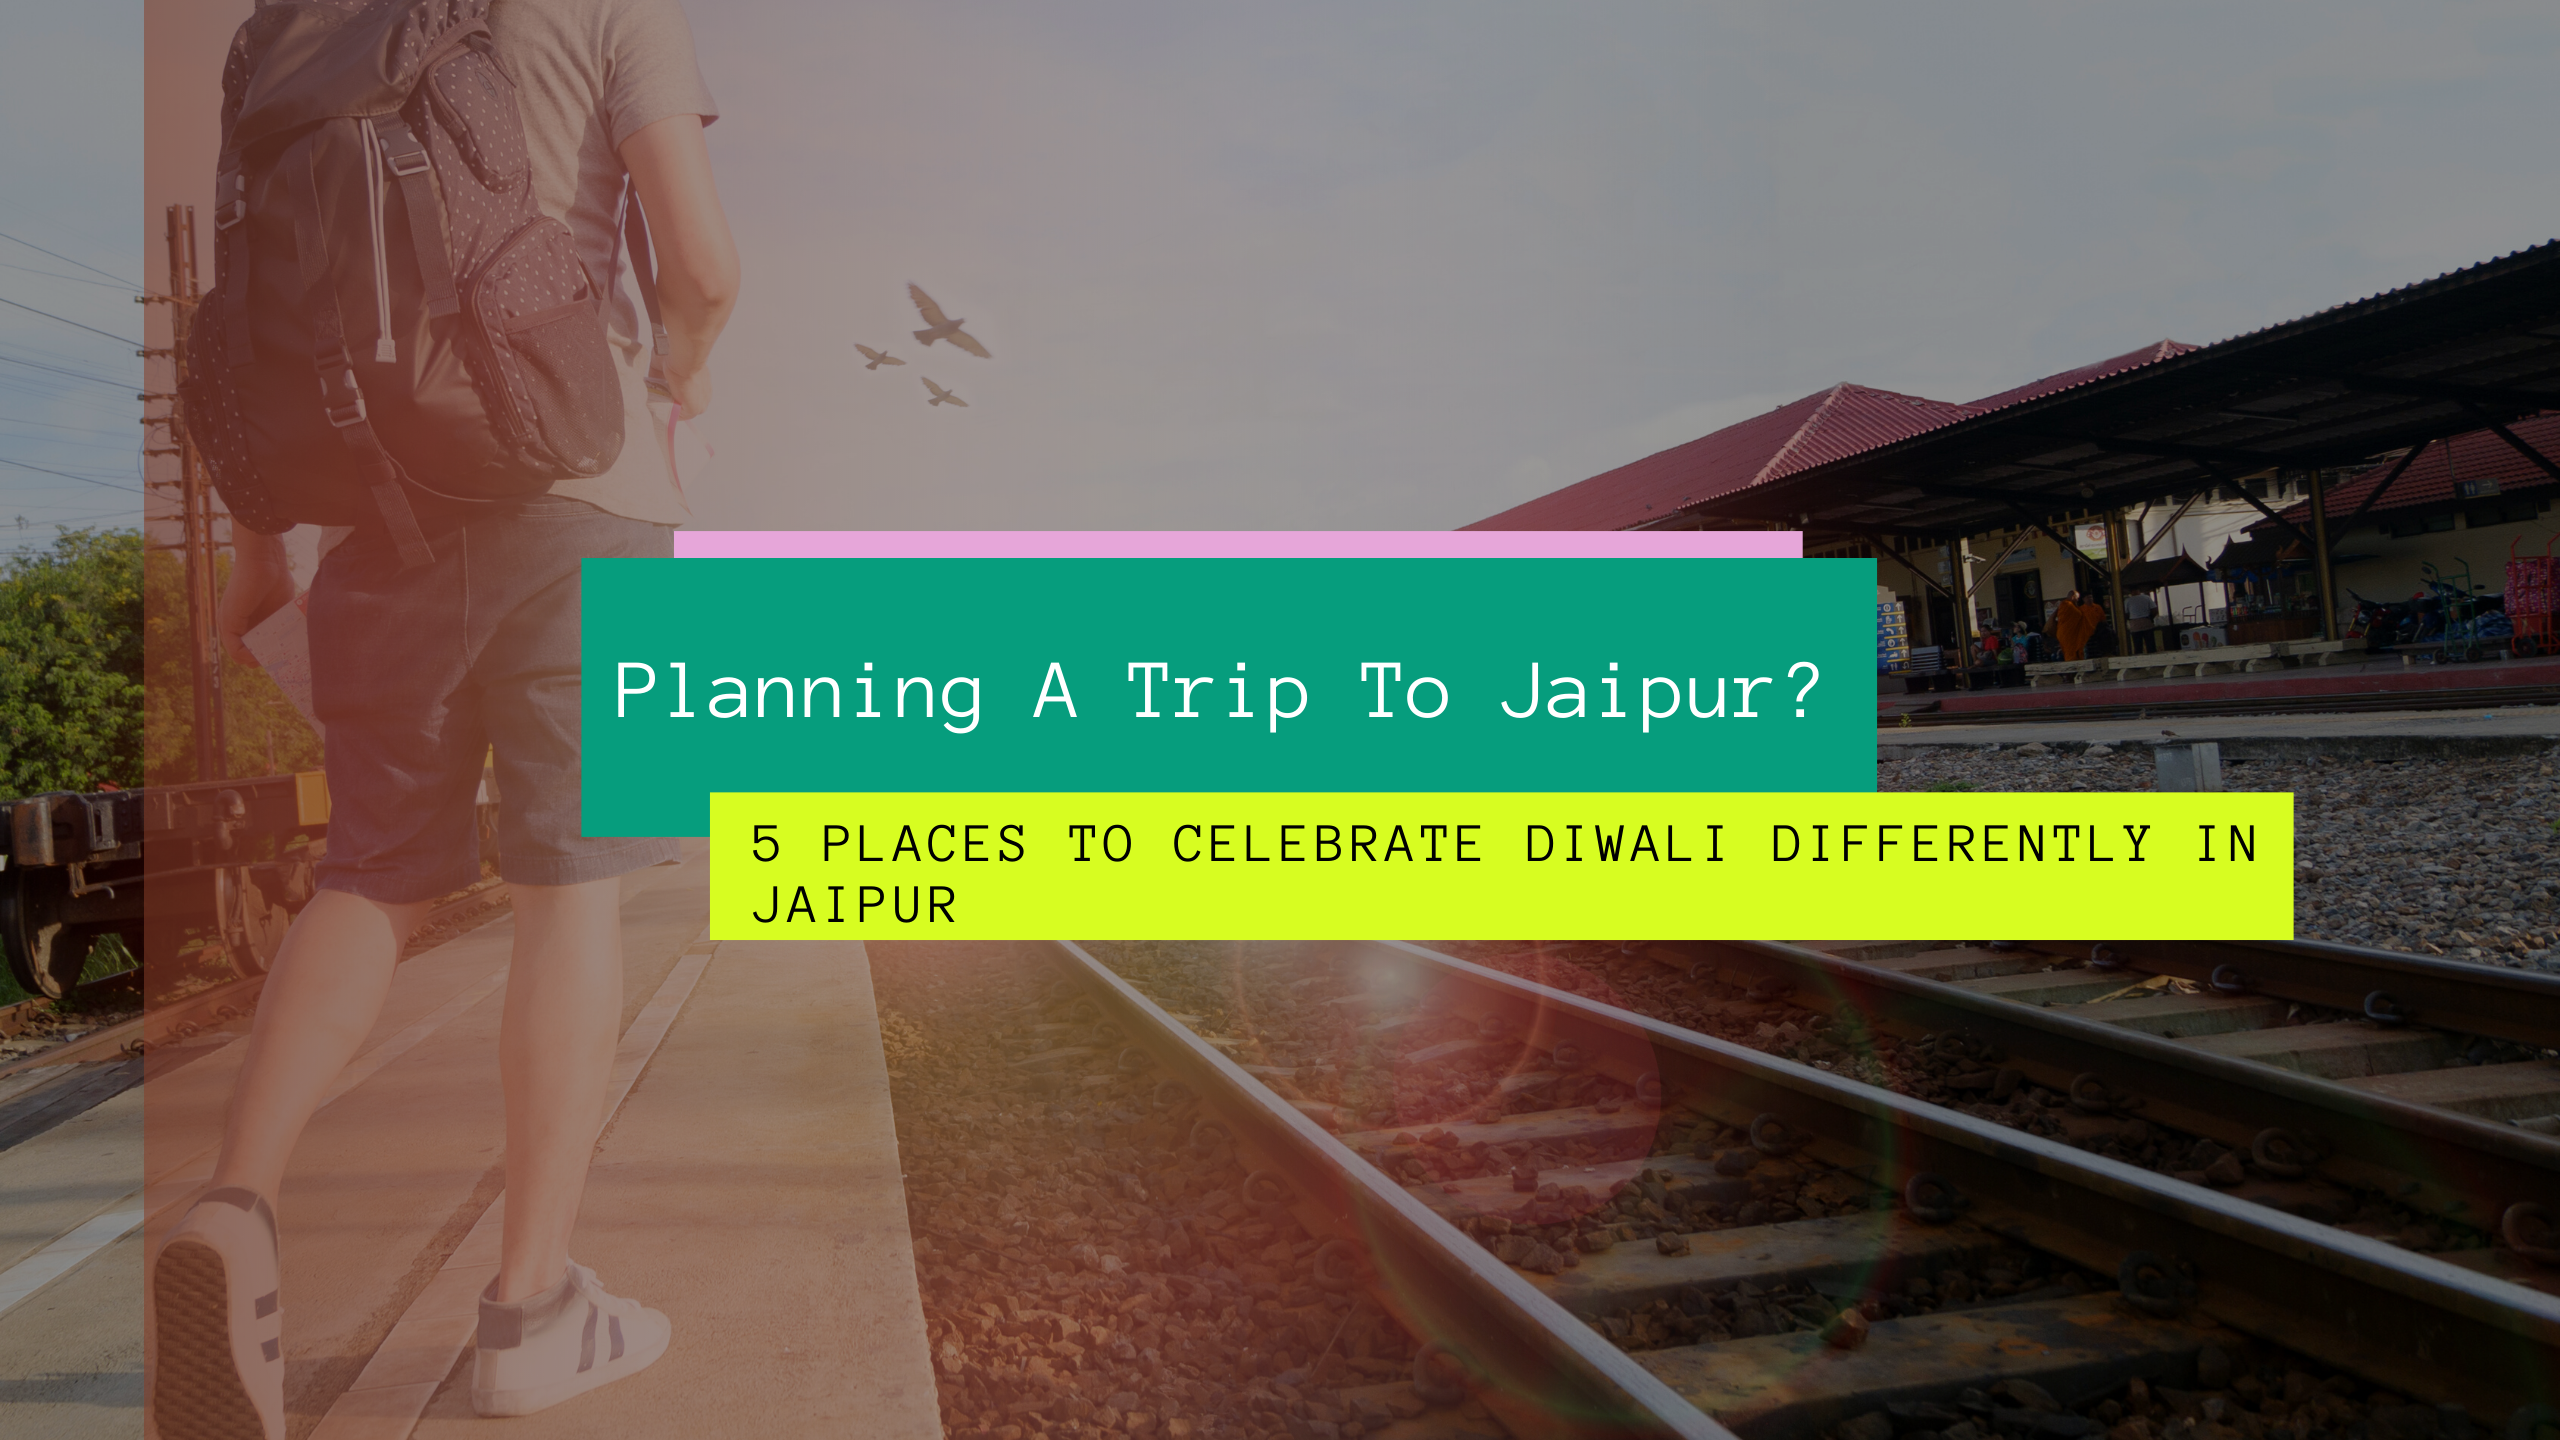 Planning A Trip To Jaipur? 5 Places To Celebrate Diwali Differently In Jaipur